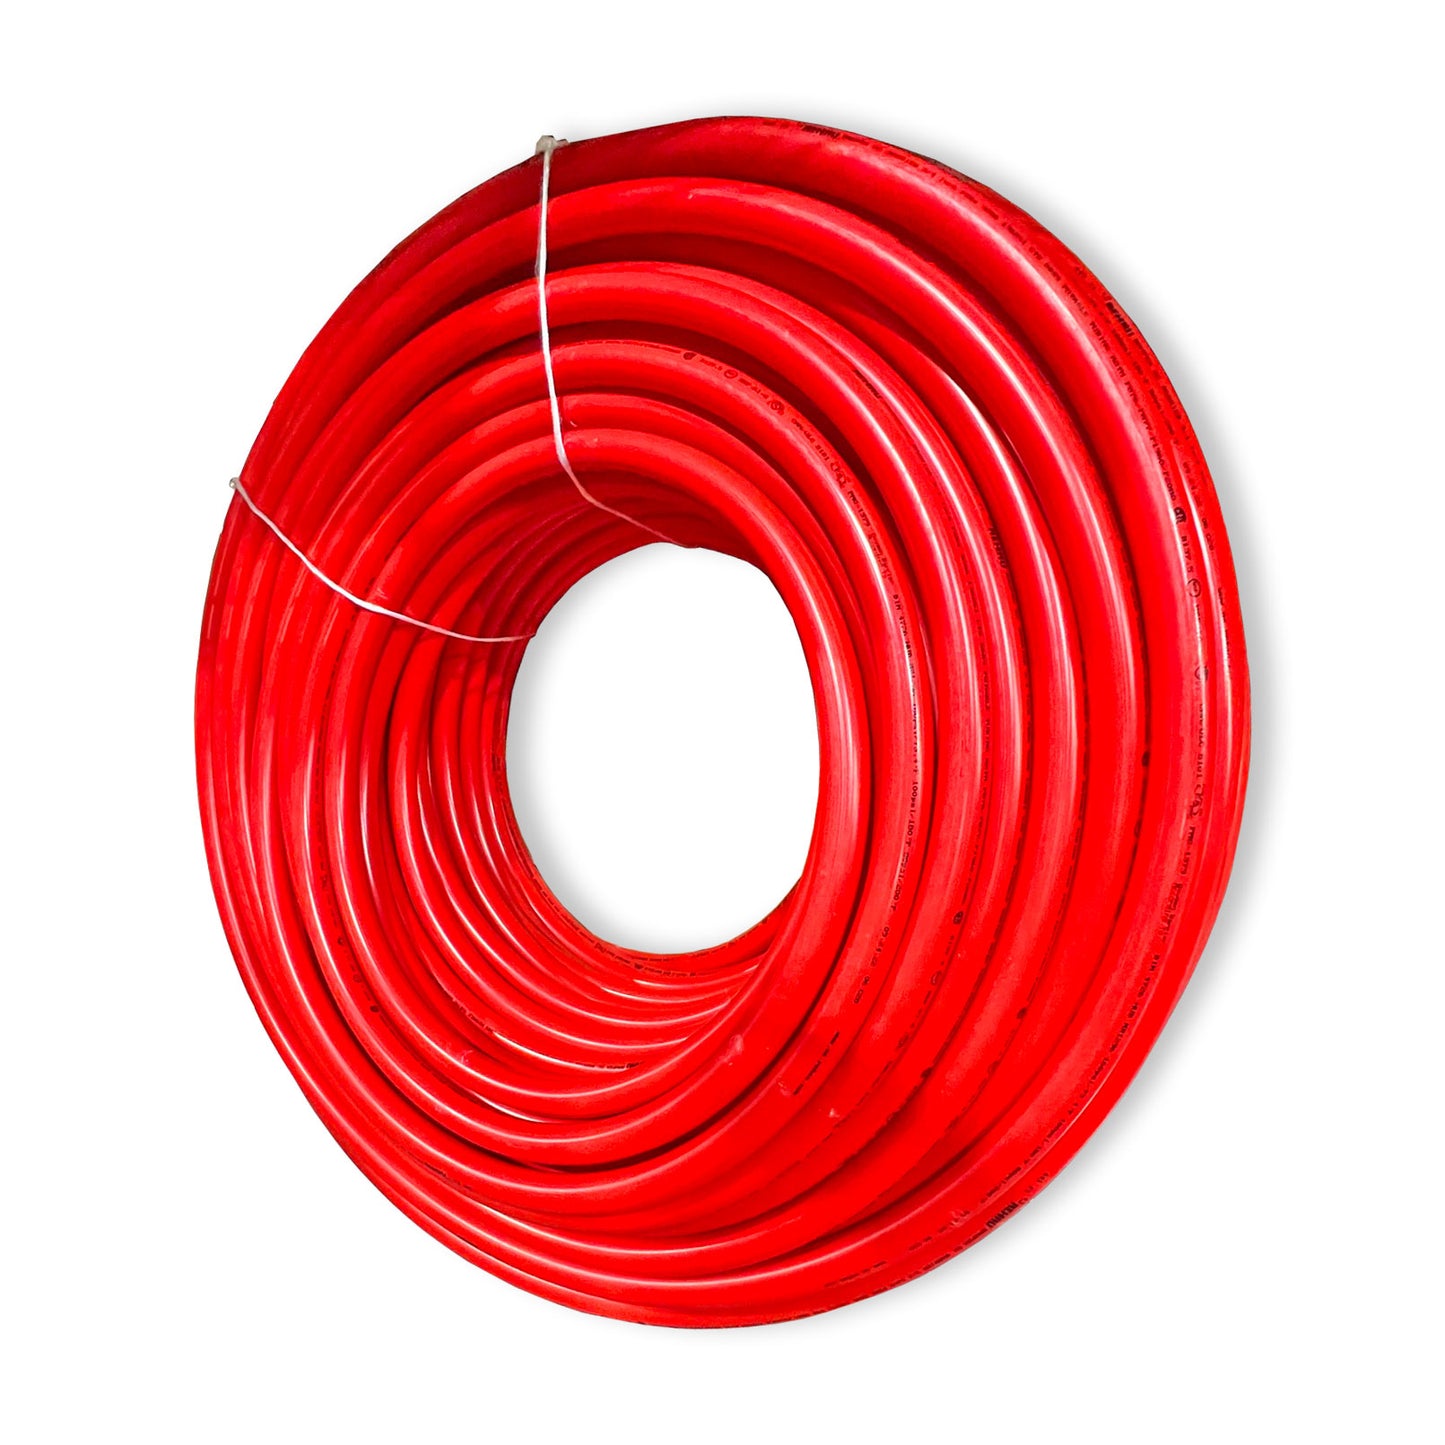 235381-102 - 1" RAUPEX Red UV Shield Pipe - 100 ft Coil